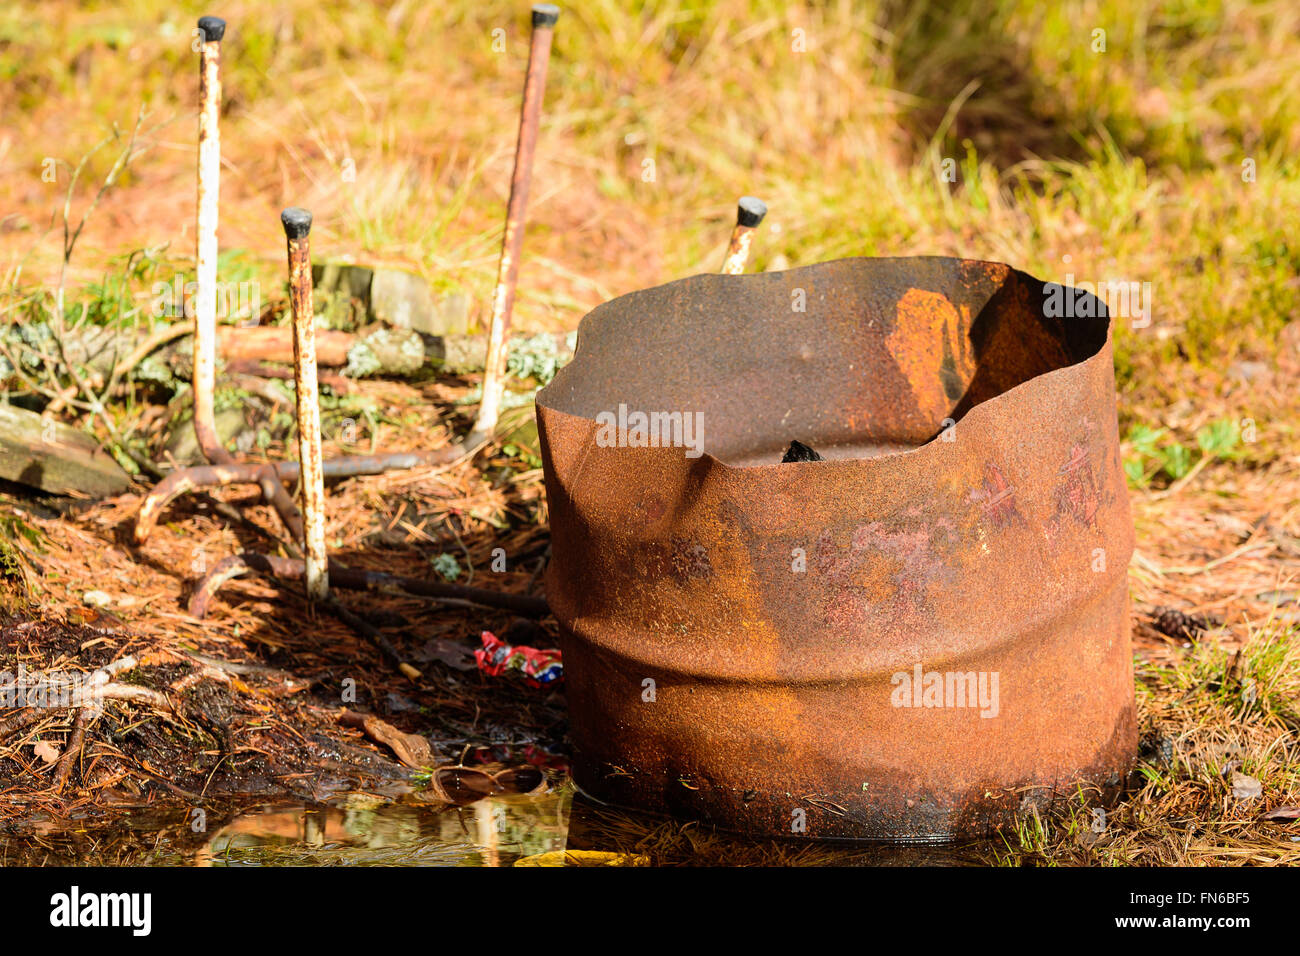 The bottom half of a rusty old barrel standing in damp and wet soil. Part of old chair in background. Stock Photo